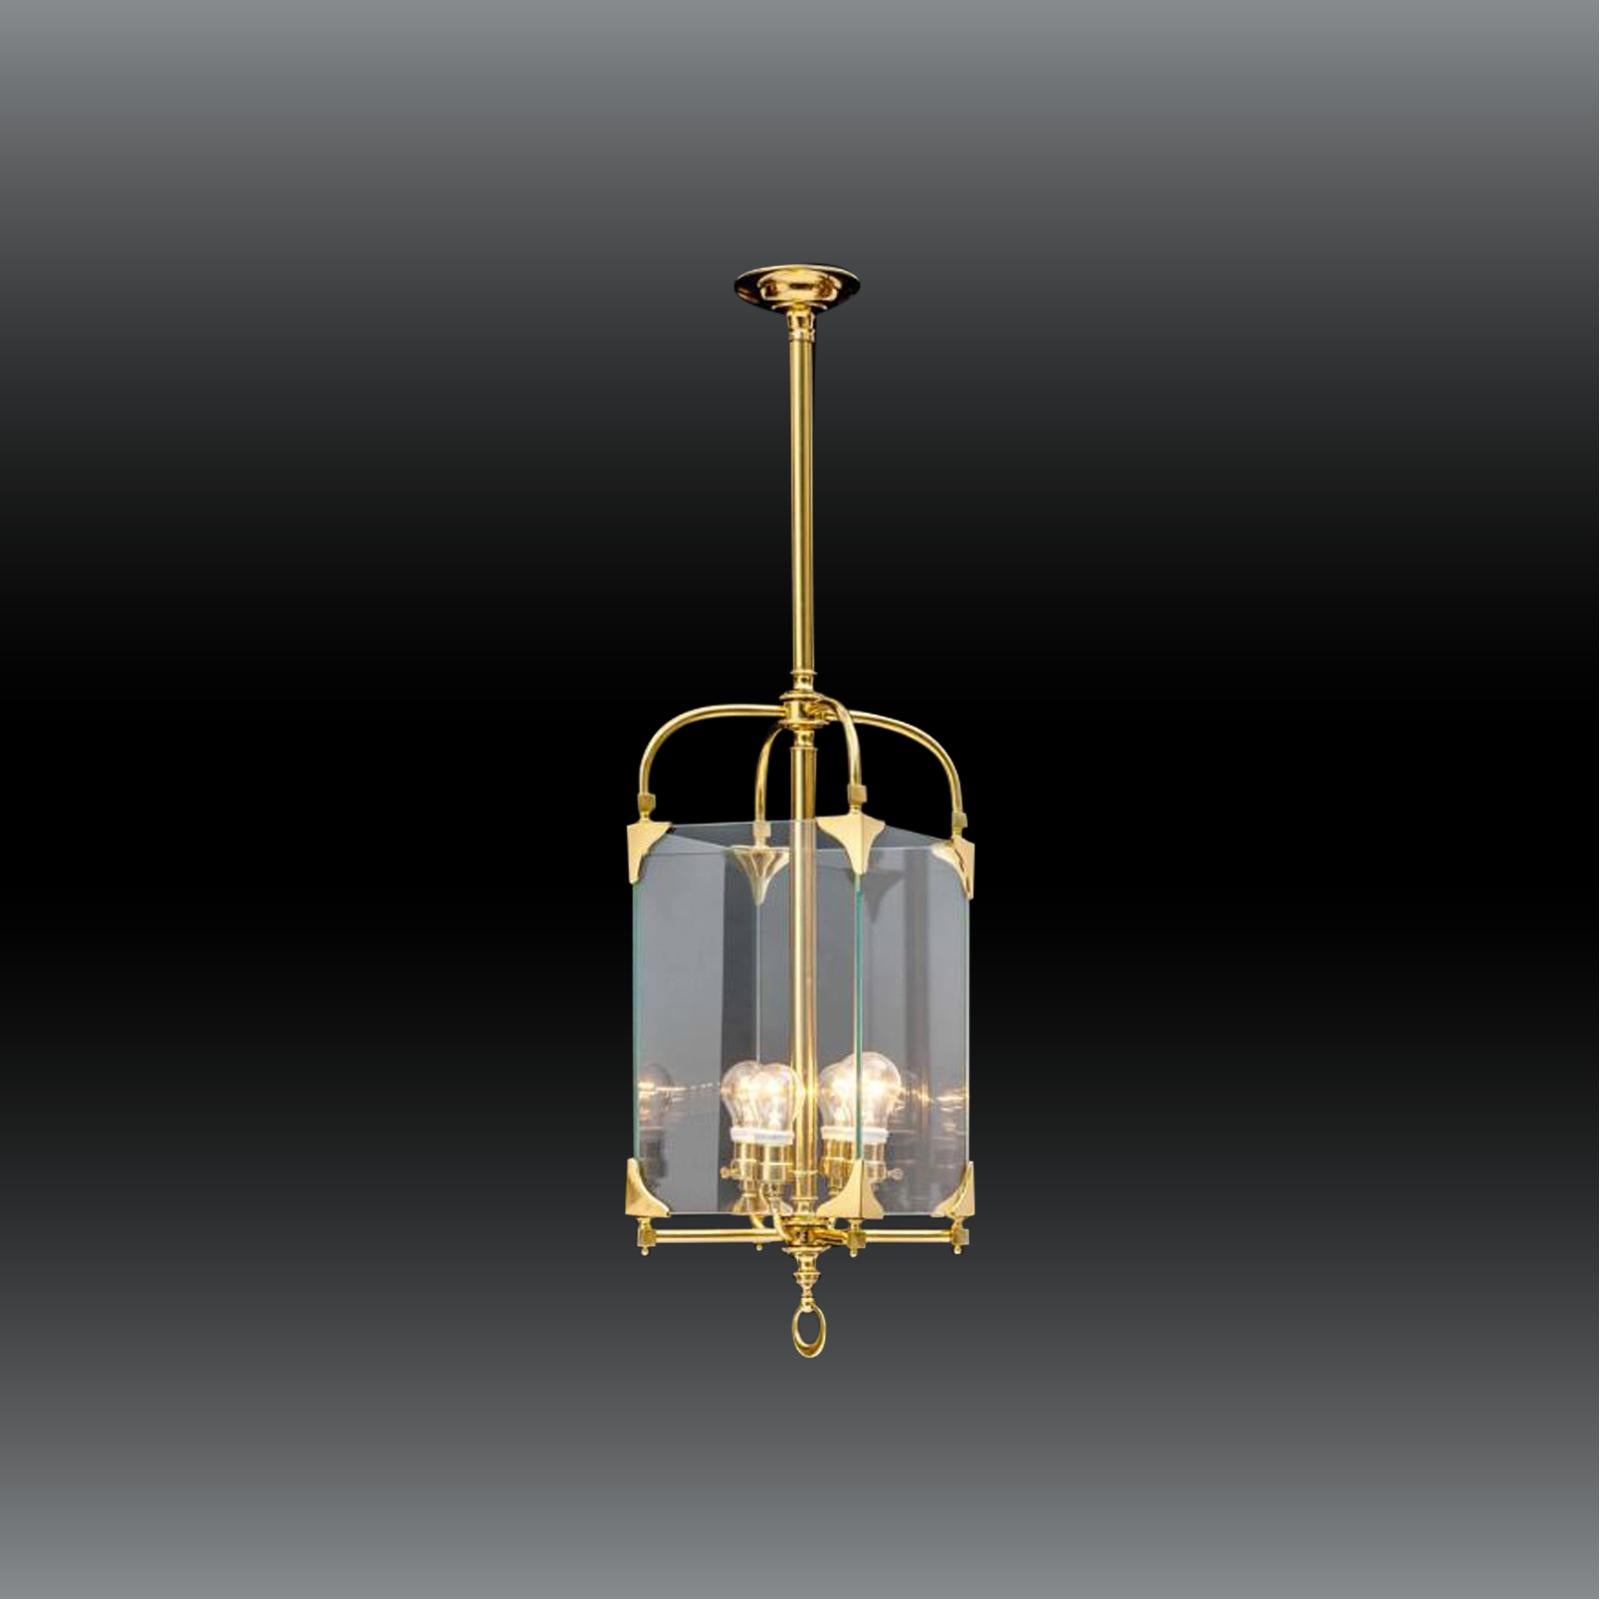 Hand-Crafted Adolf Loos Secession Jugendstil Glass and Brass Lantern Chandelier Re-Edition For Sale